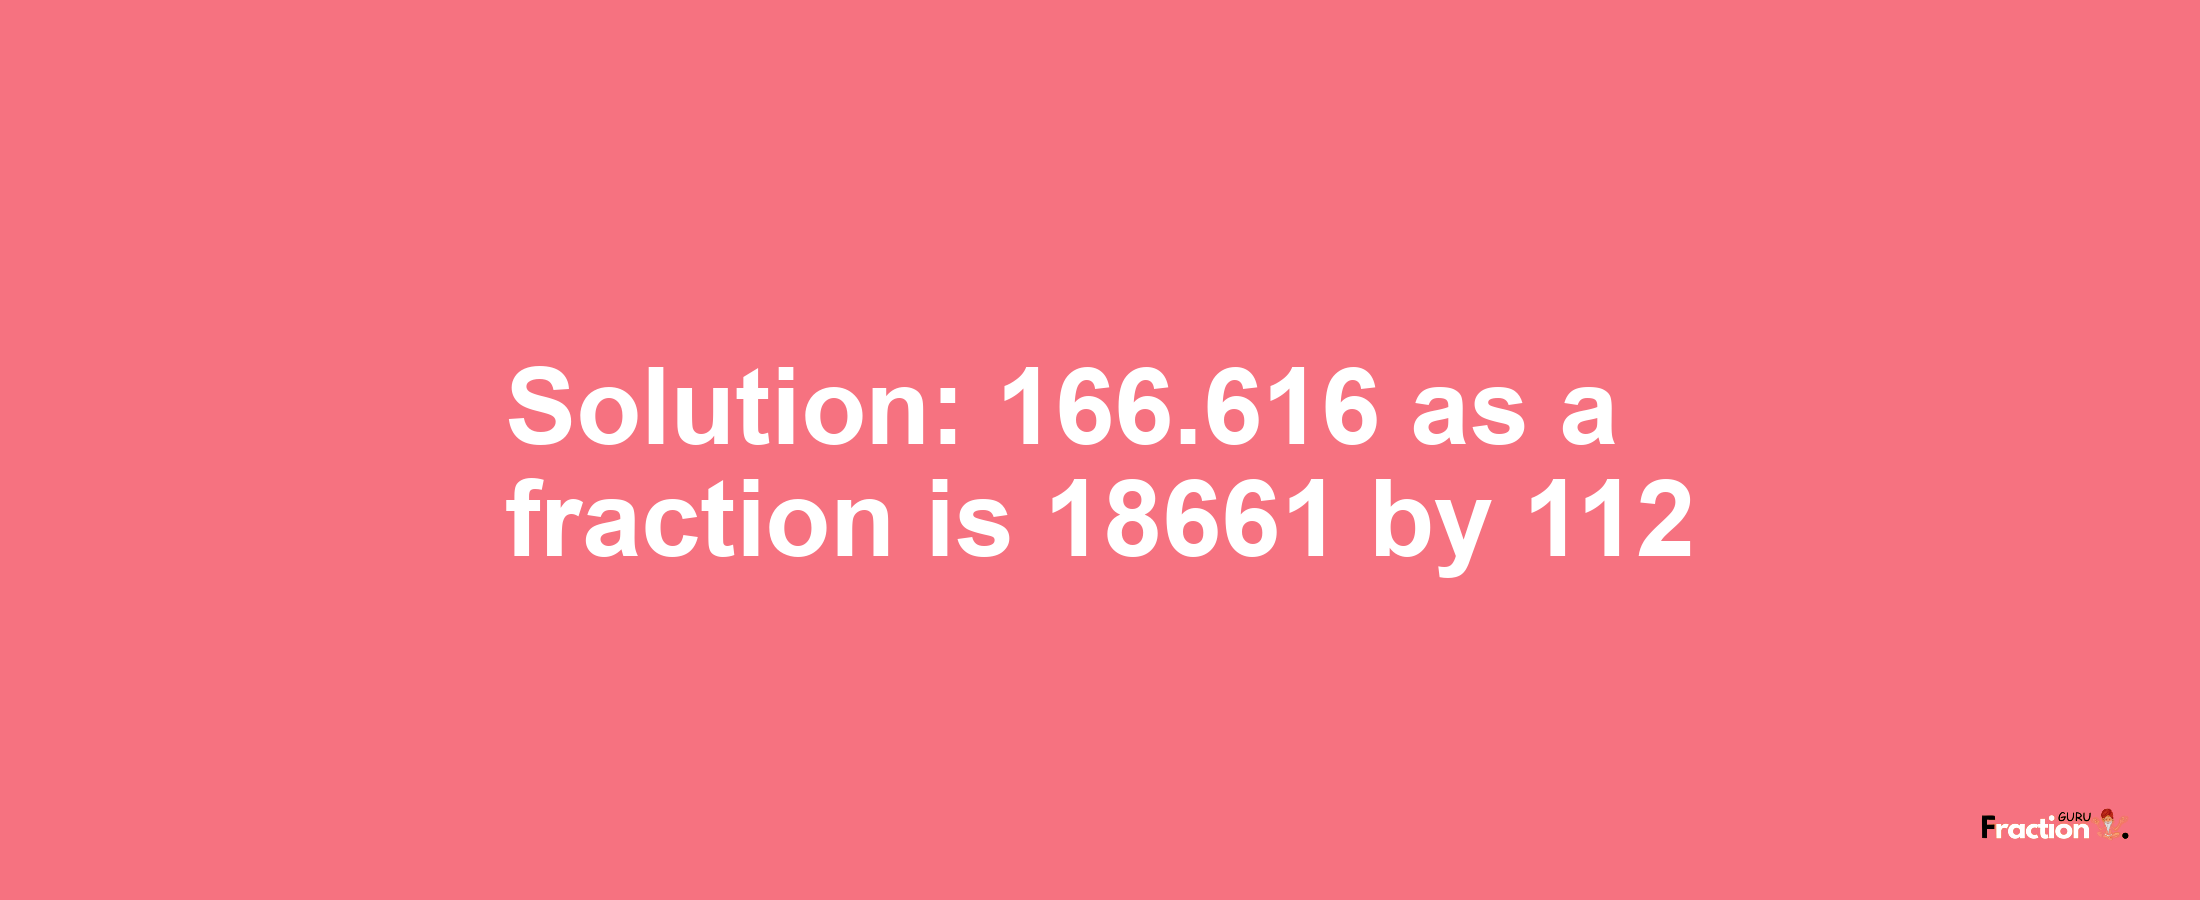 Solution:166.616 as a fraction is 18661/112